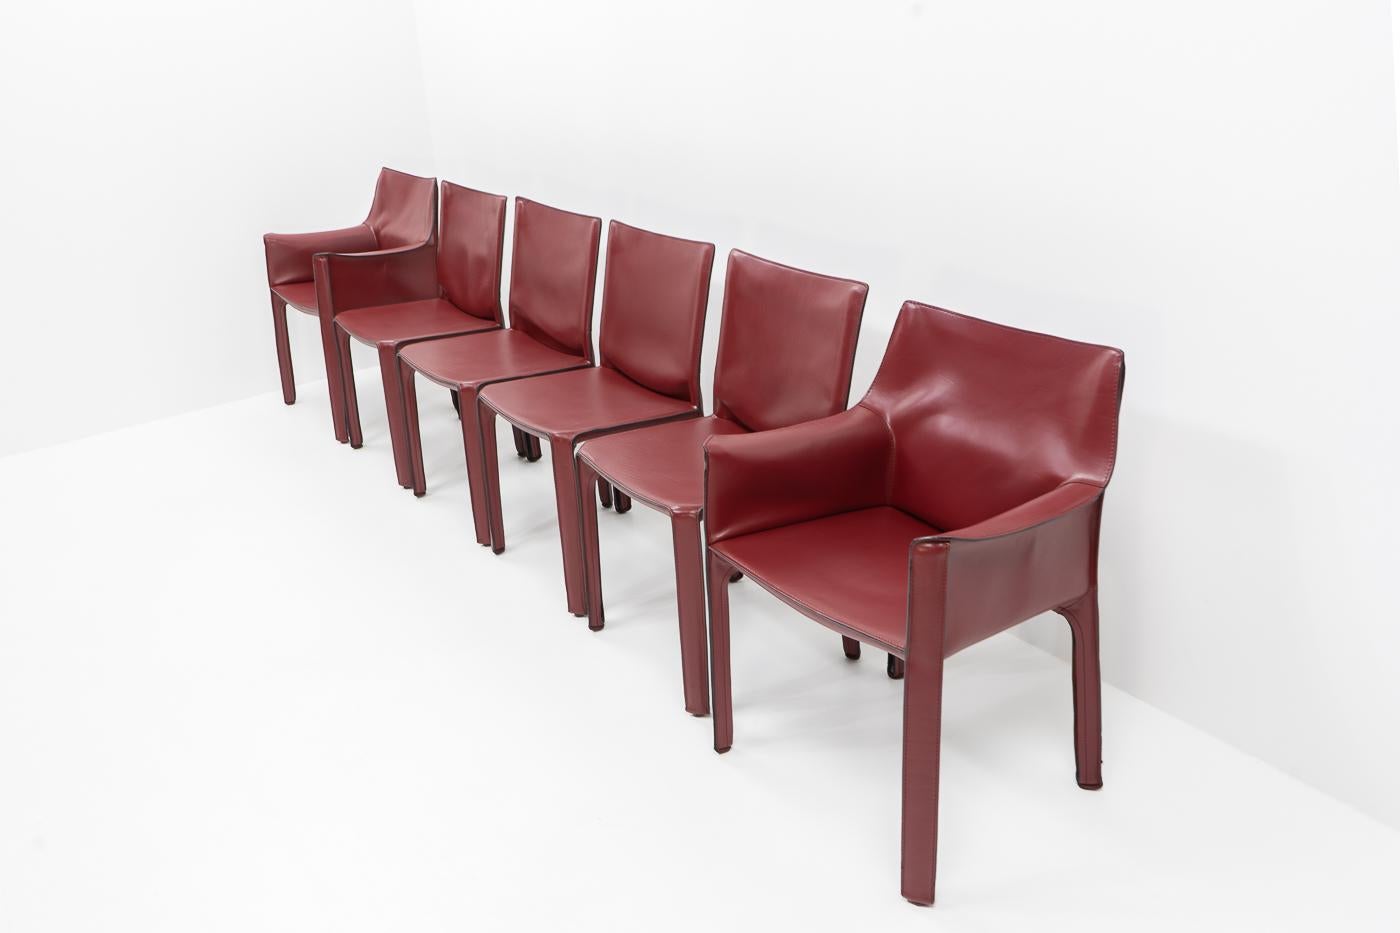 Late 20th Century Italian Design Classics, Cab Chairs by Mario Bellini for Cassina, Set of 6 For Sale